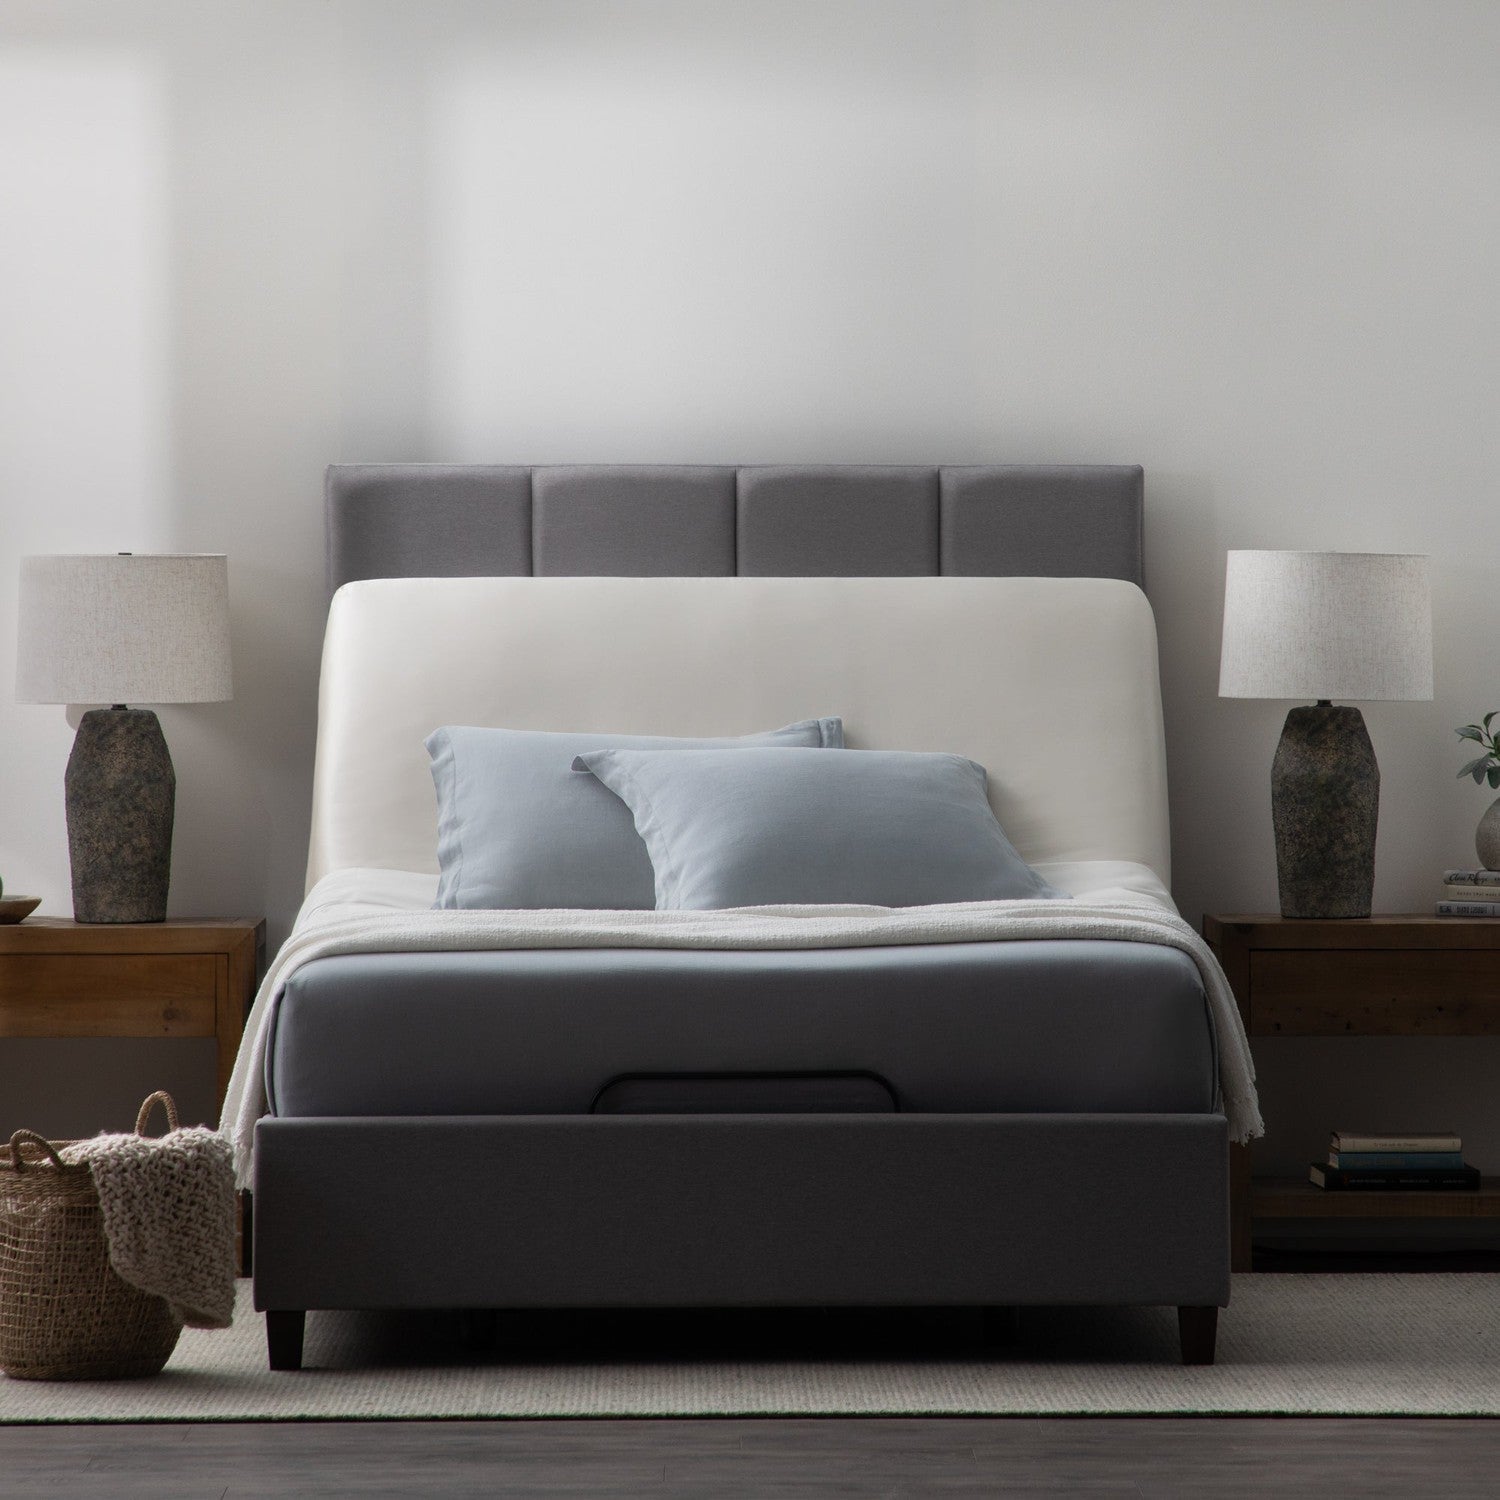 Malouf S655 Adjustable Bed Base-Purely Relaxation